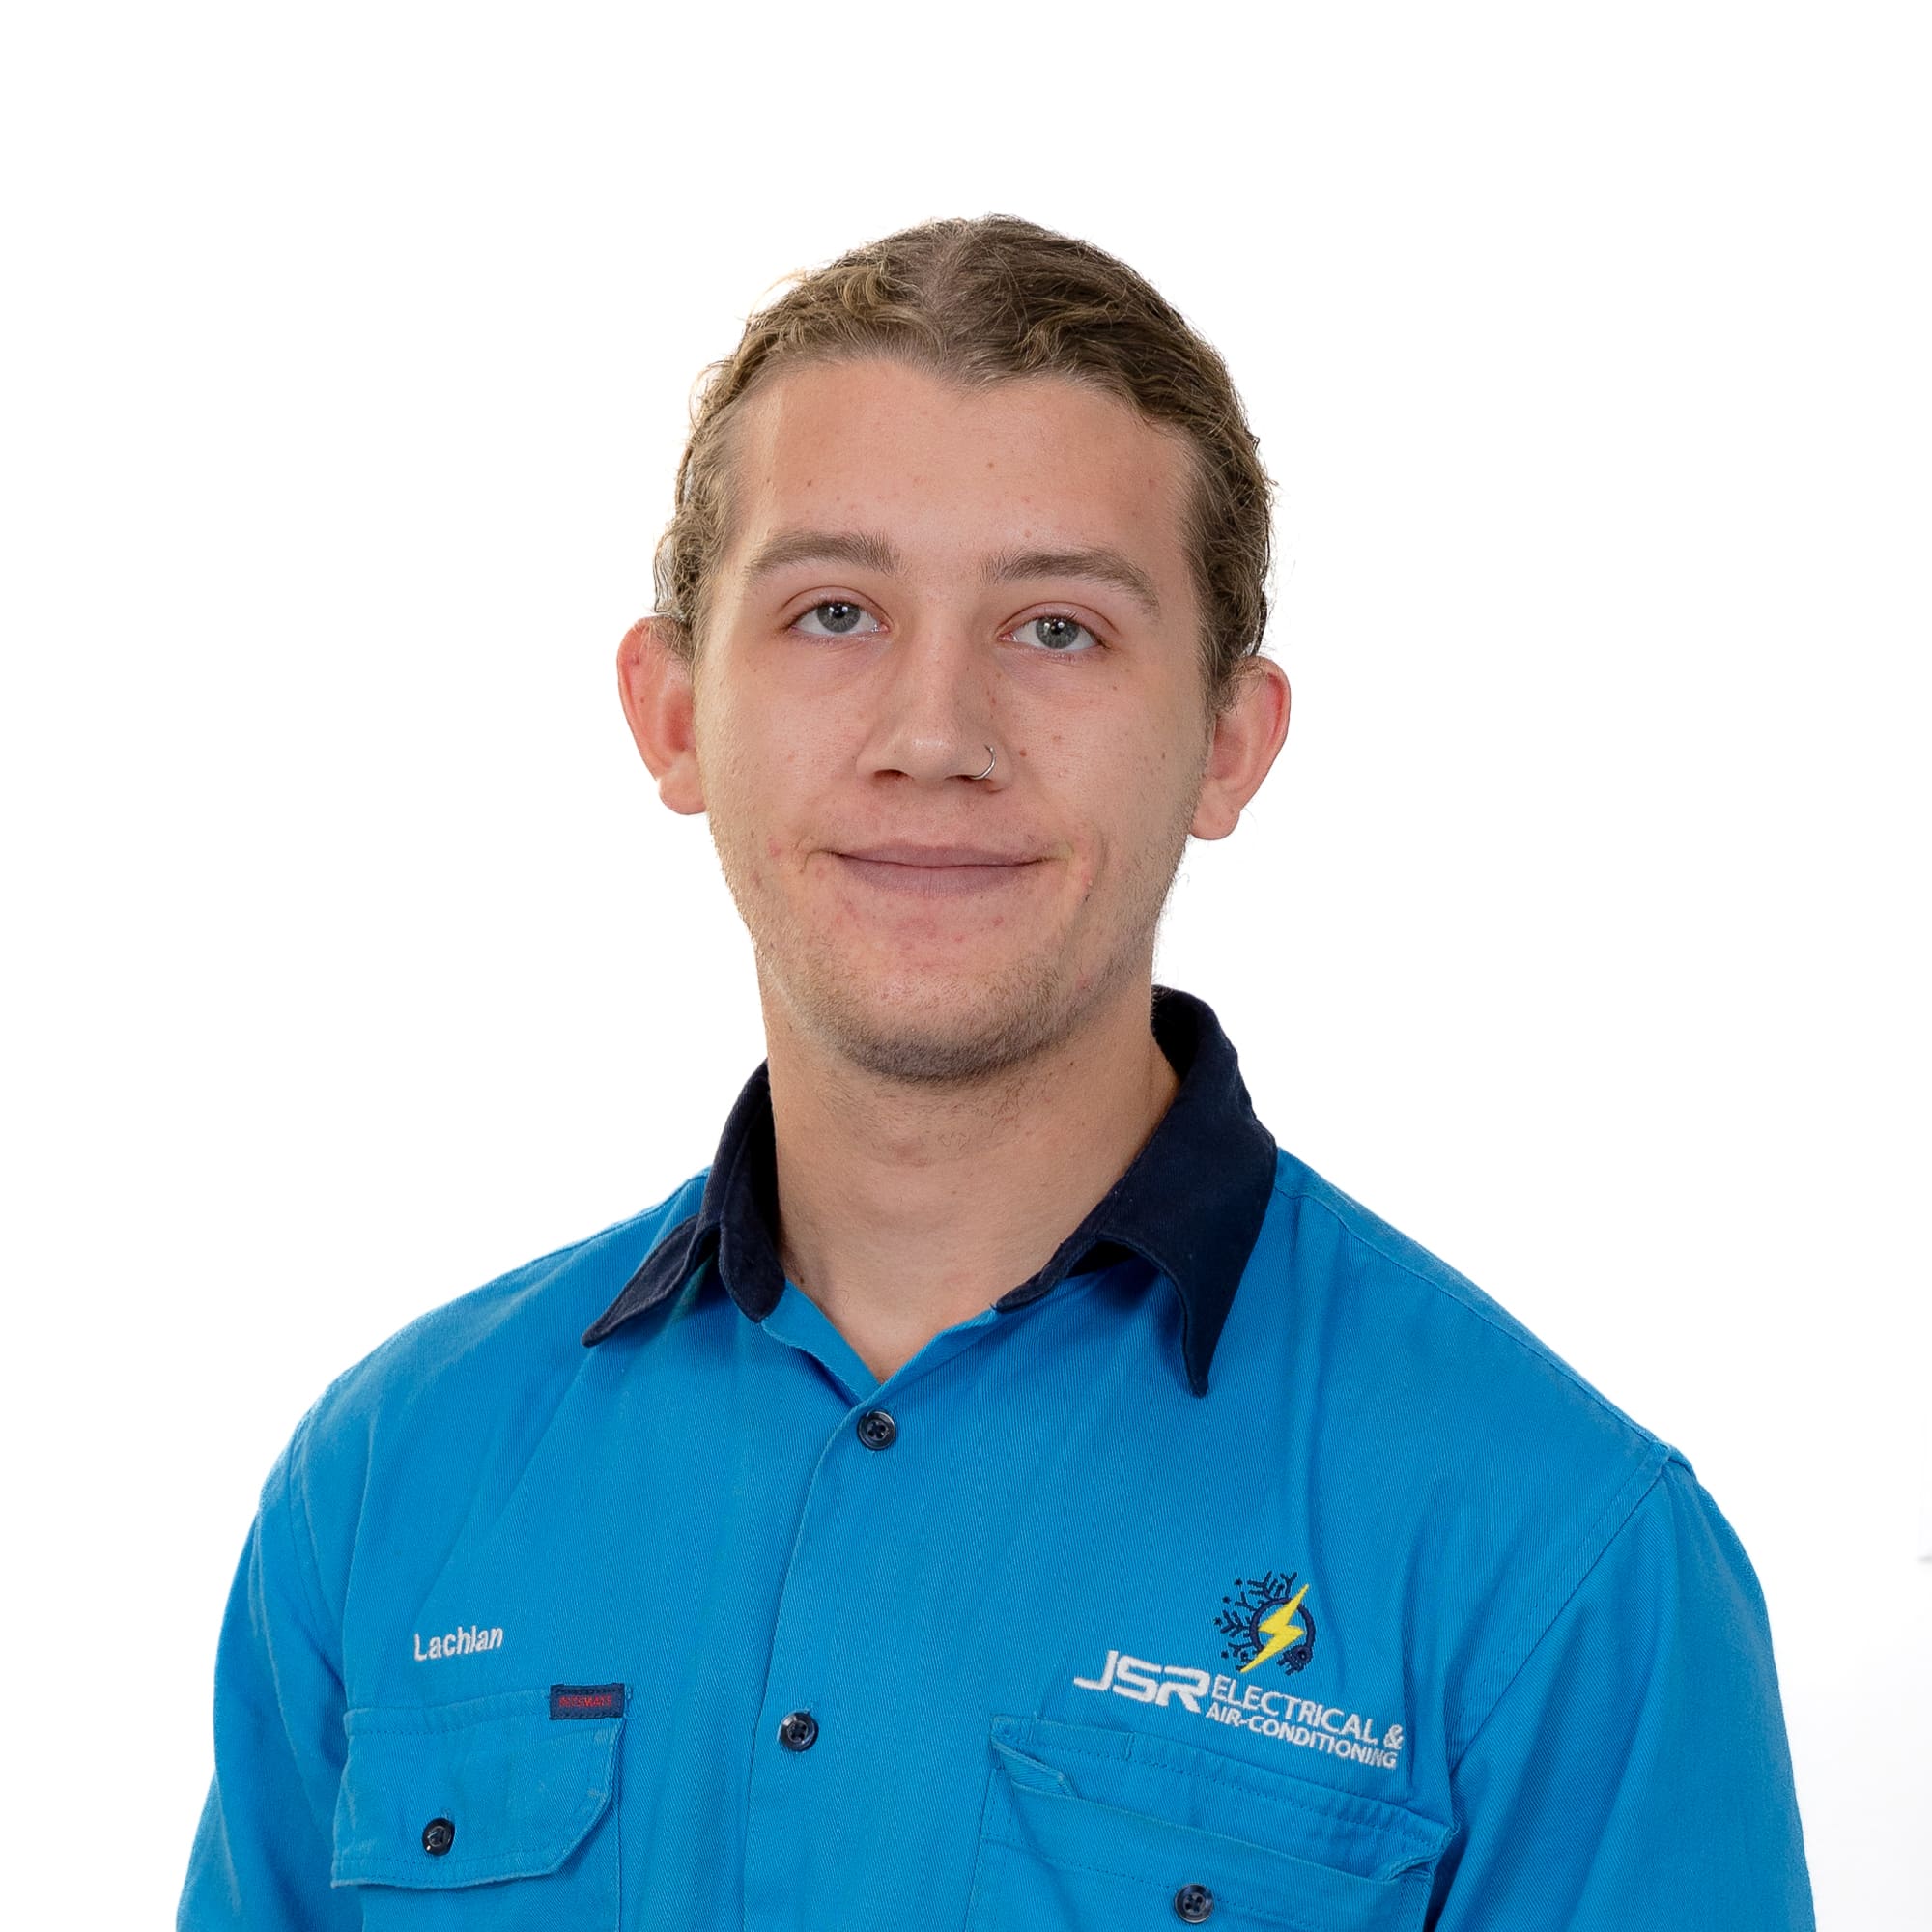 Mackay electrician looking at camera smiling for staff photo